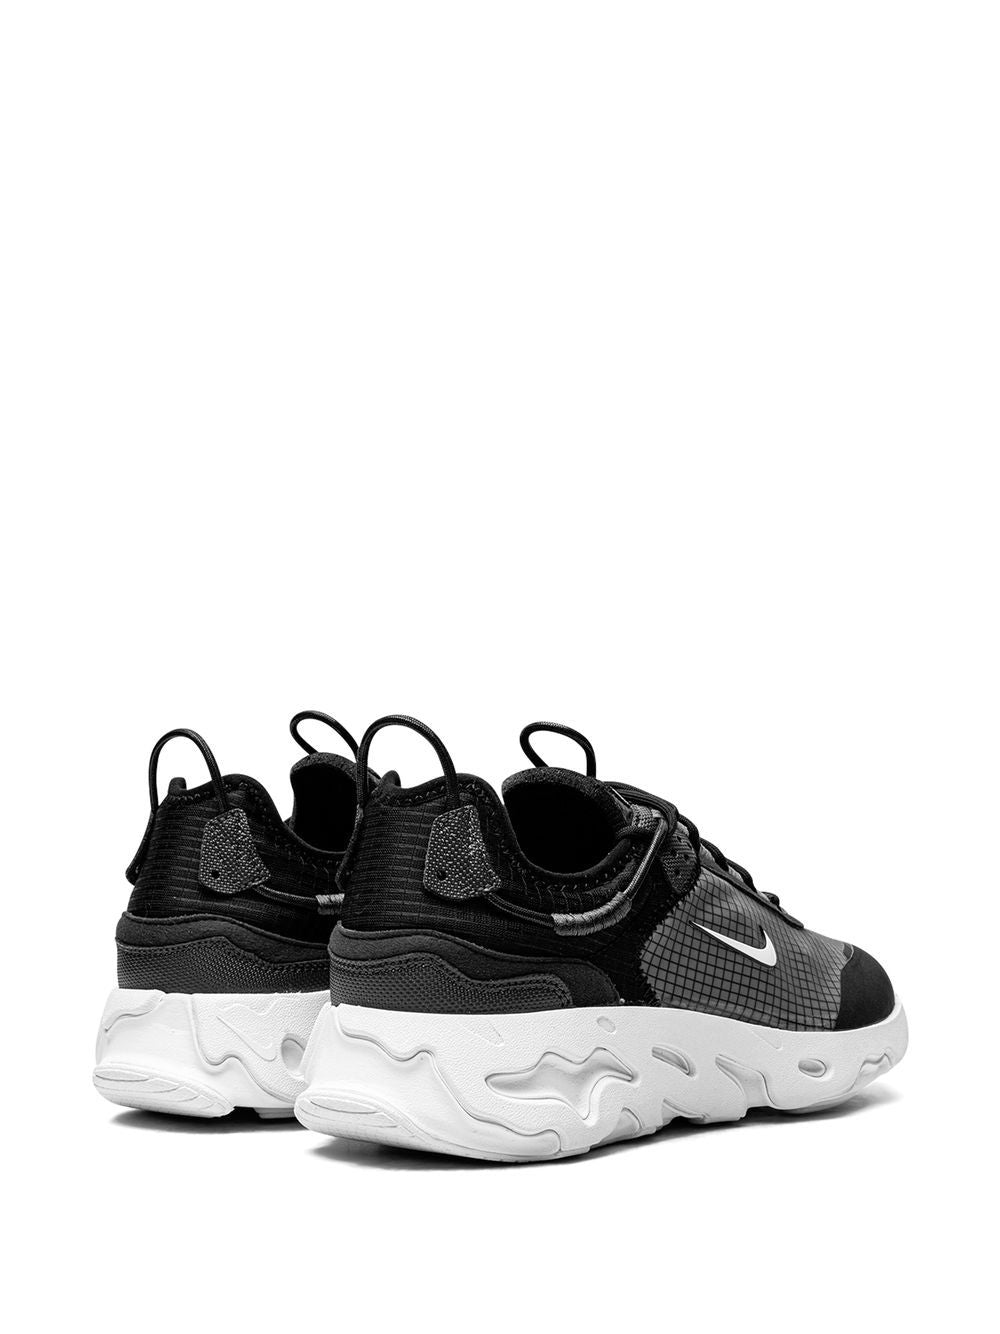 Nike-OUTLET-SALE-React Live Sneakers-ARCHIVIST